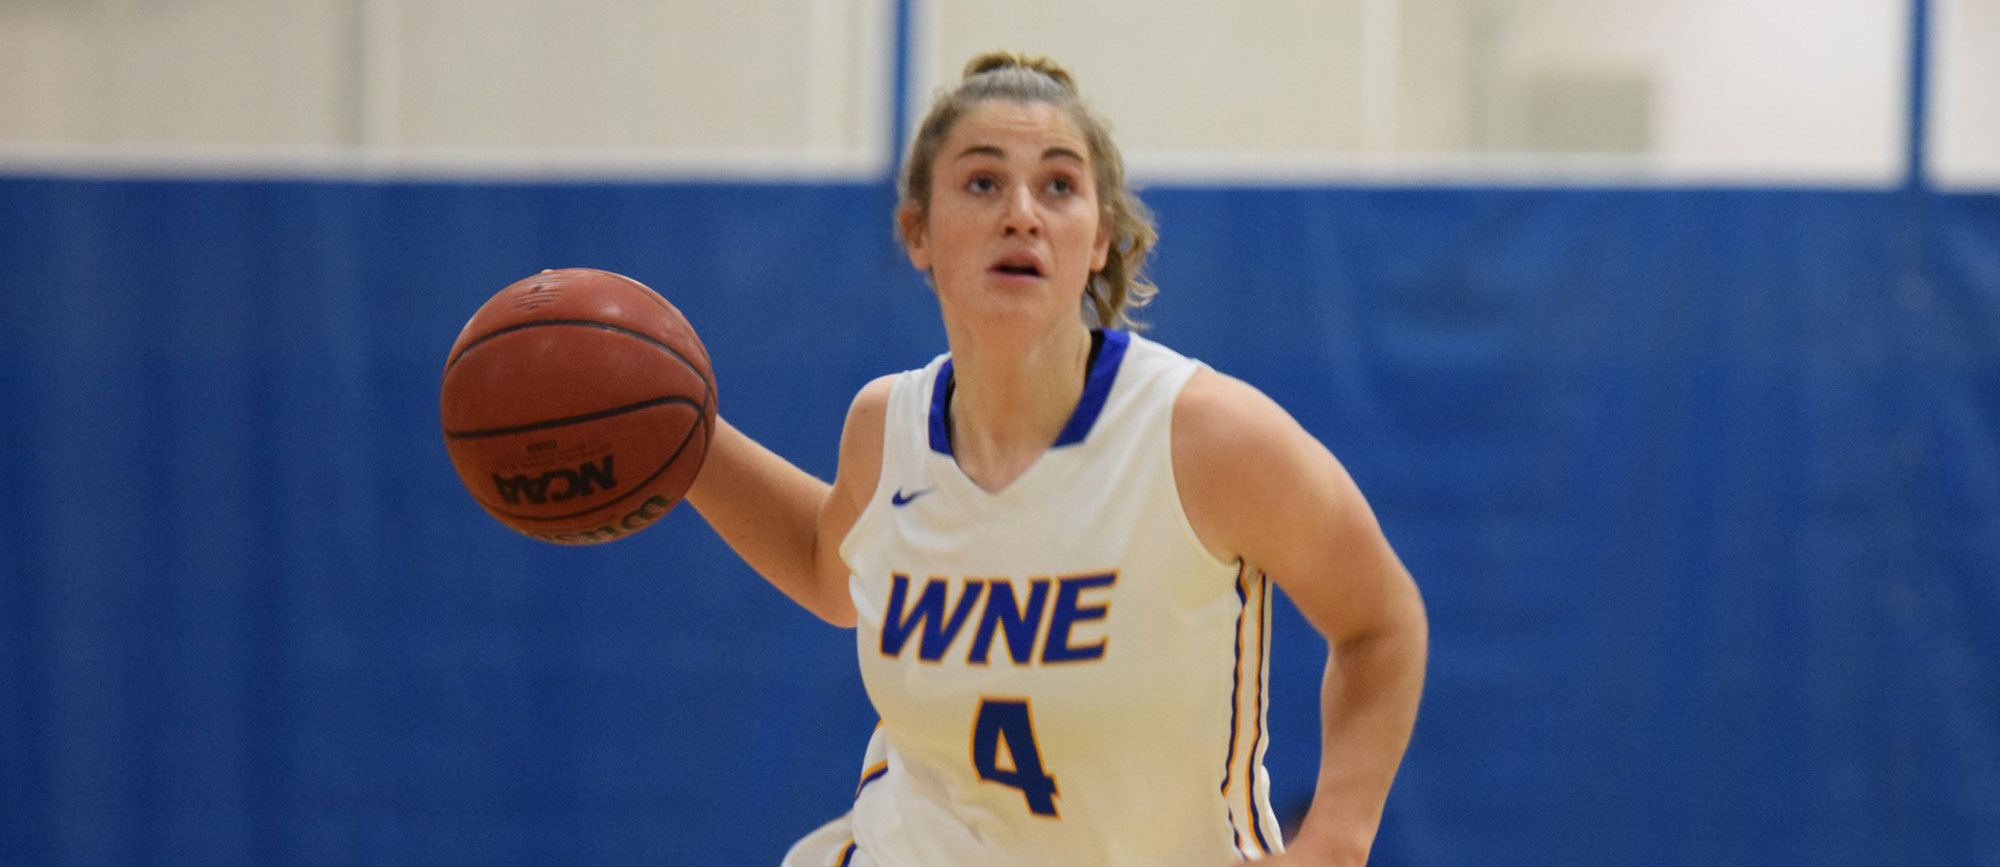 Lauren Chadwick scored a career-high 15 points in a 53-42 win over U. of New England. (Photo by Rachael Margossian)